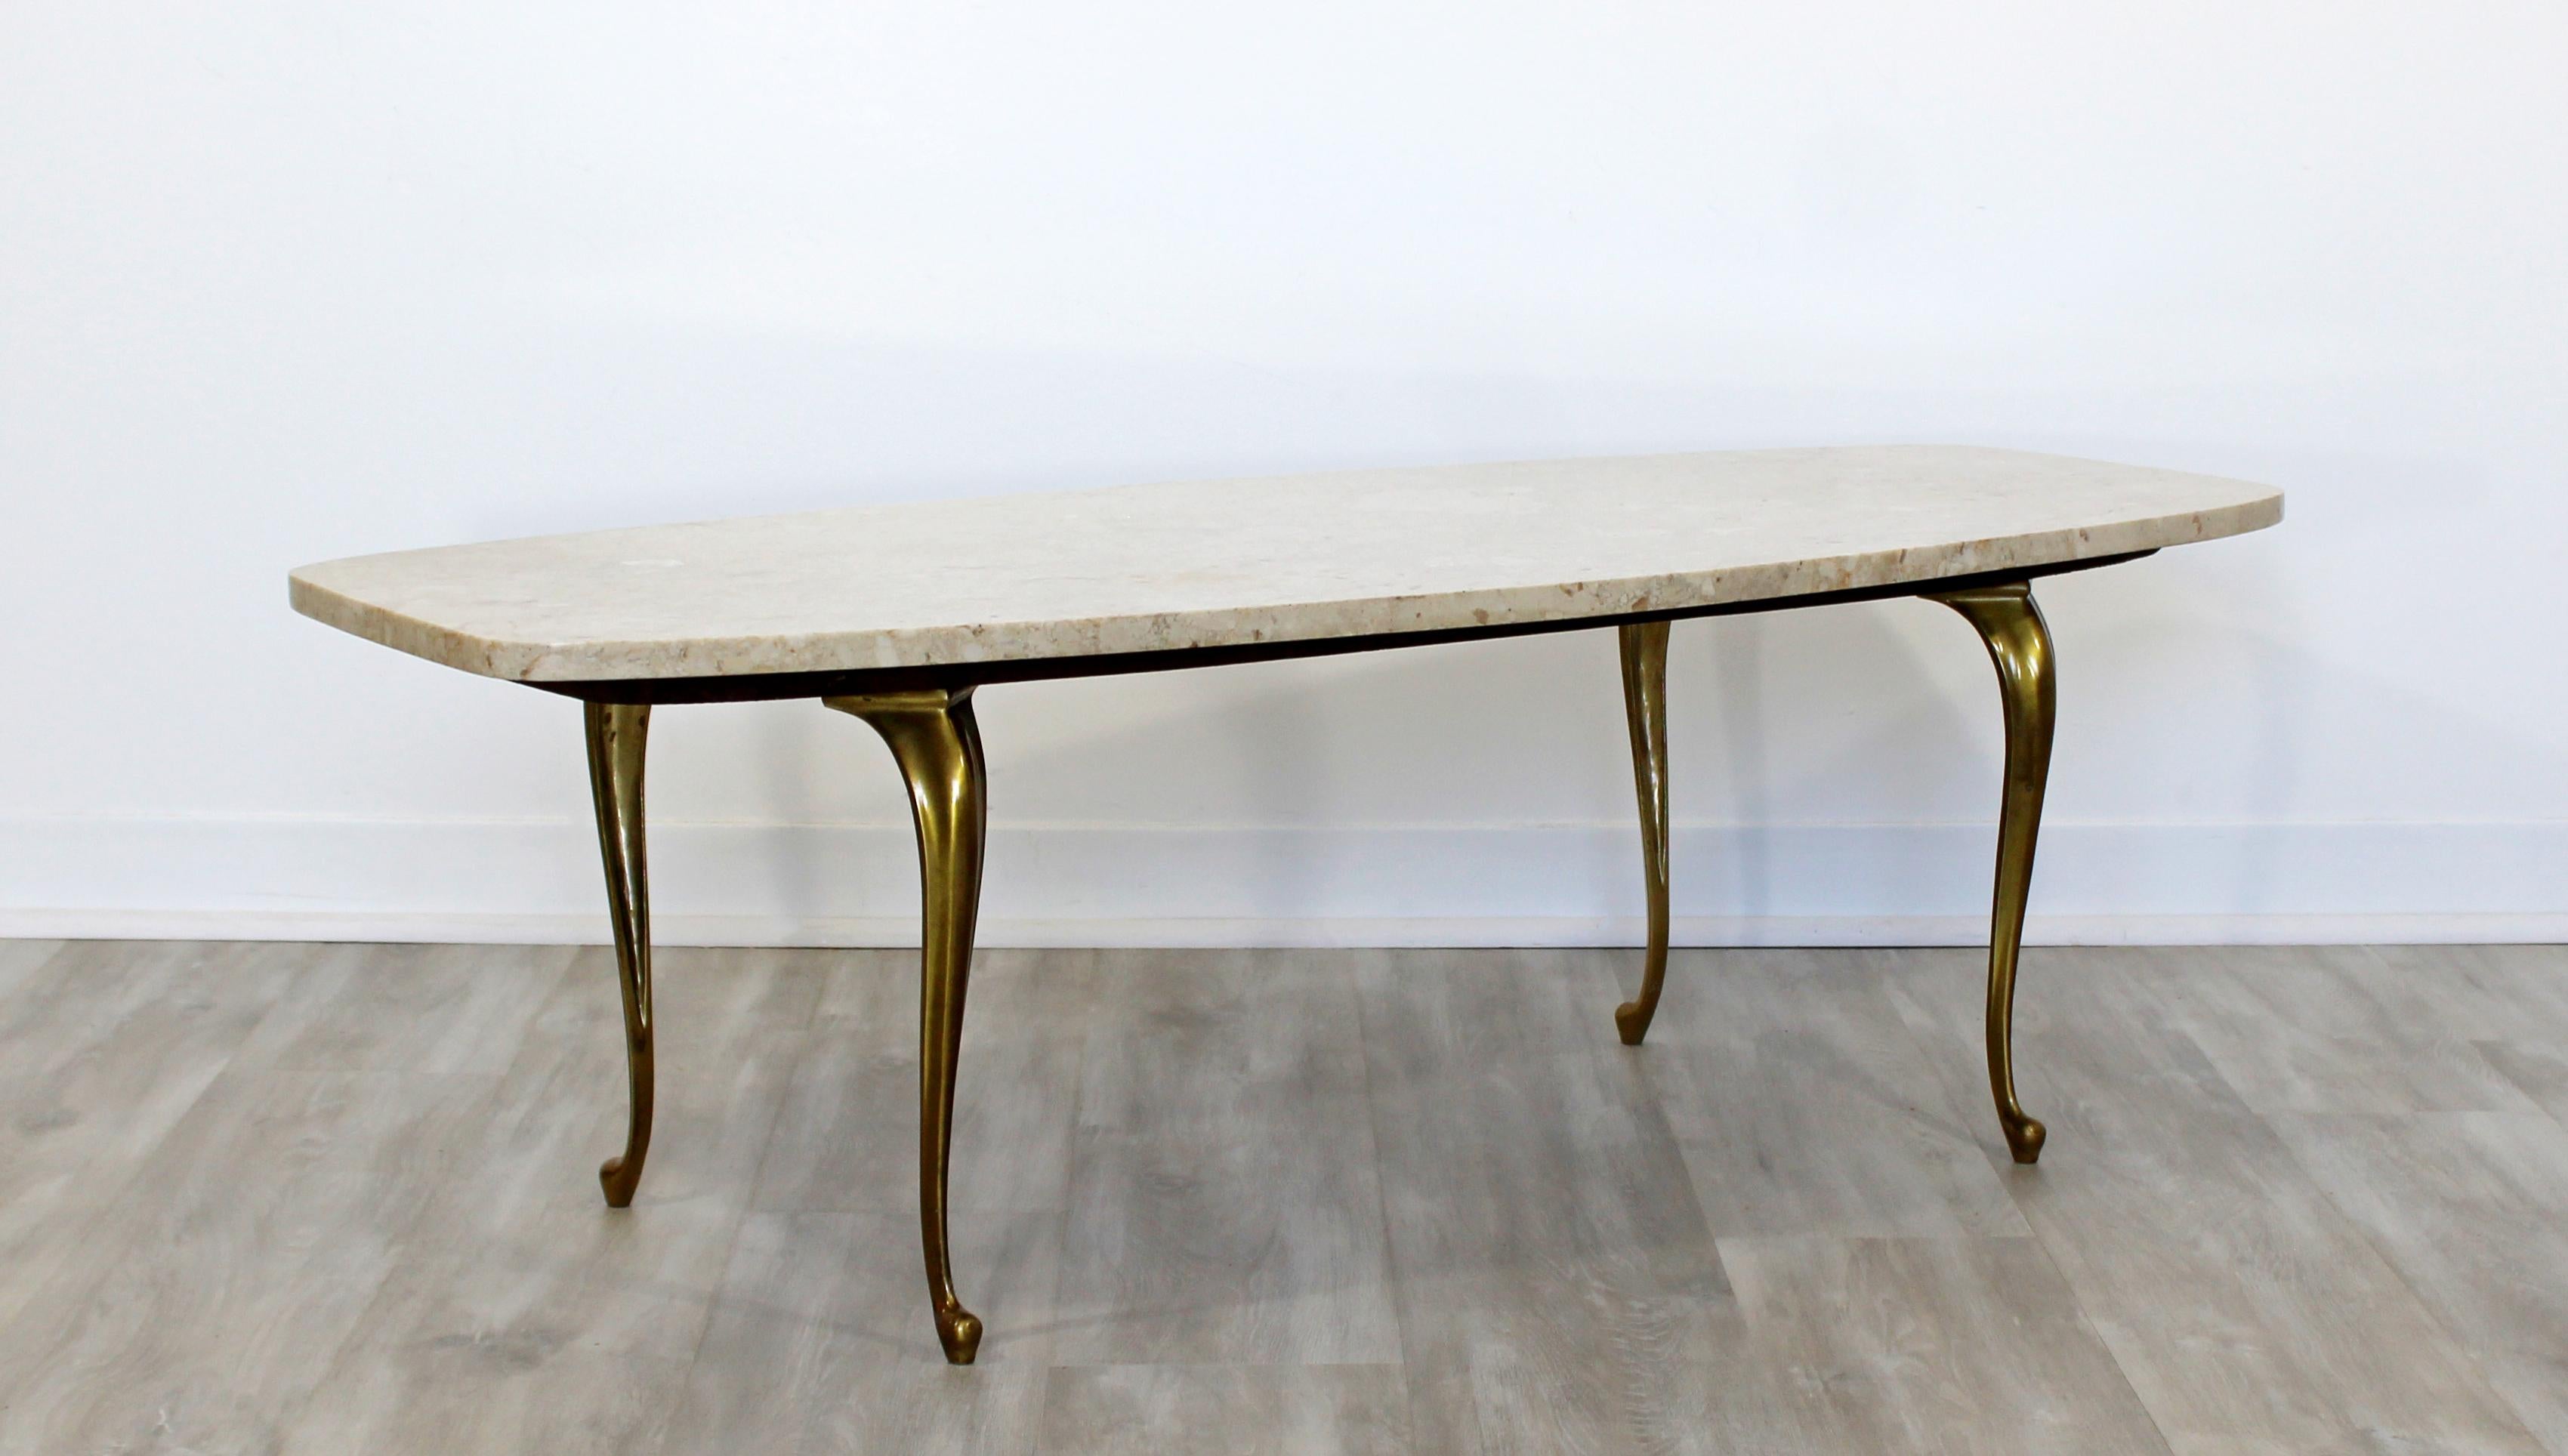 For your consideration is a gorgeous, marble topped coffee table on brass legs, circa the 1960s. In very good vintage condition. The dimensions are 49